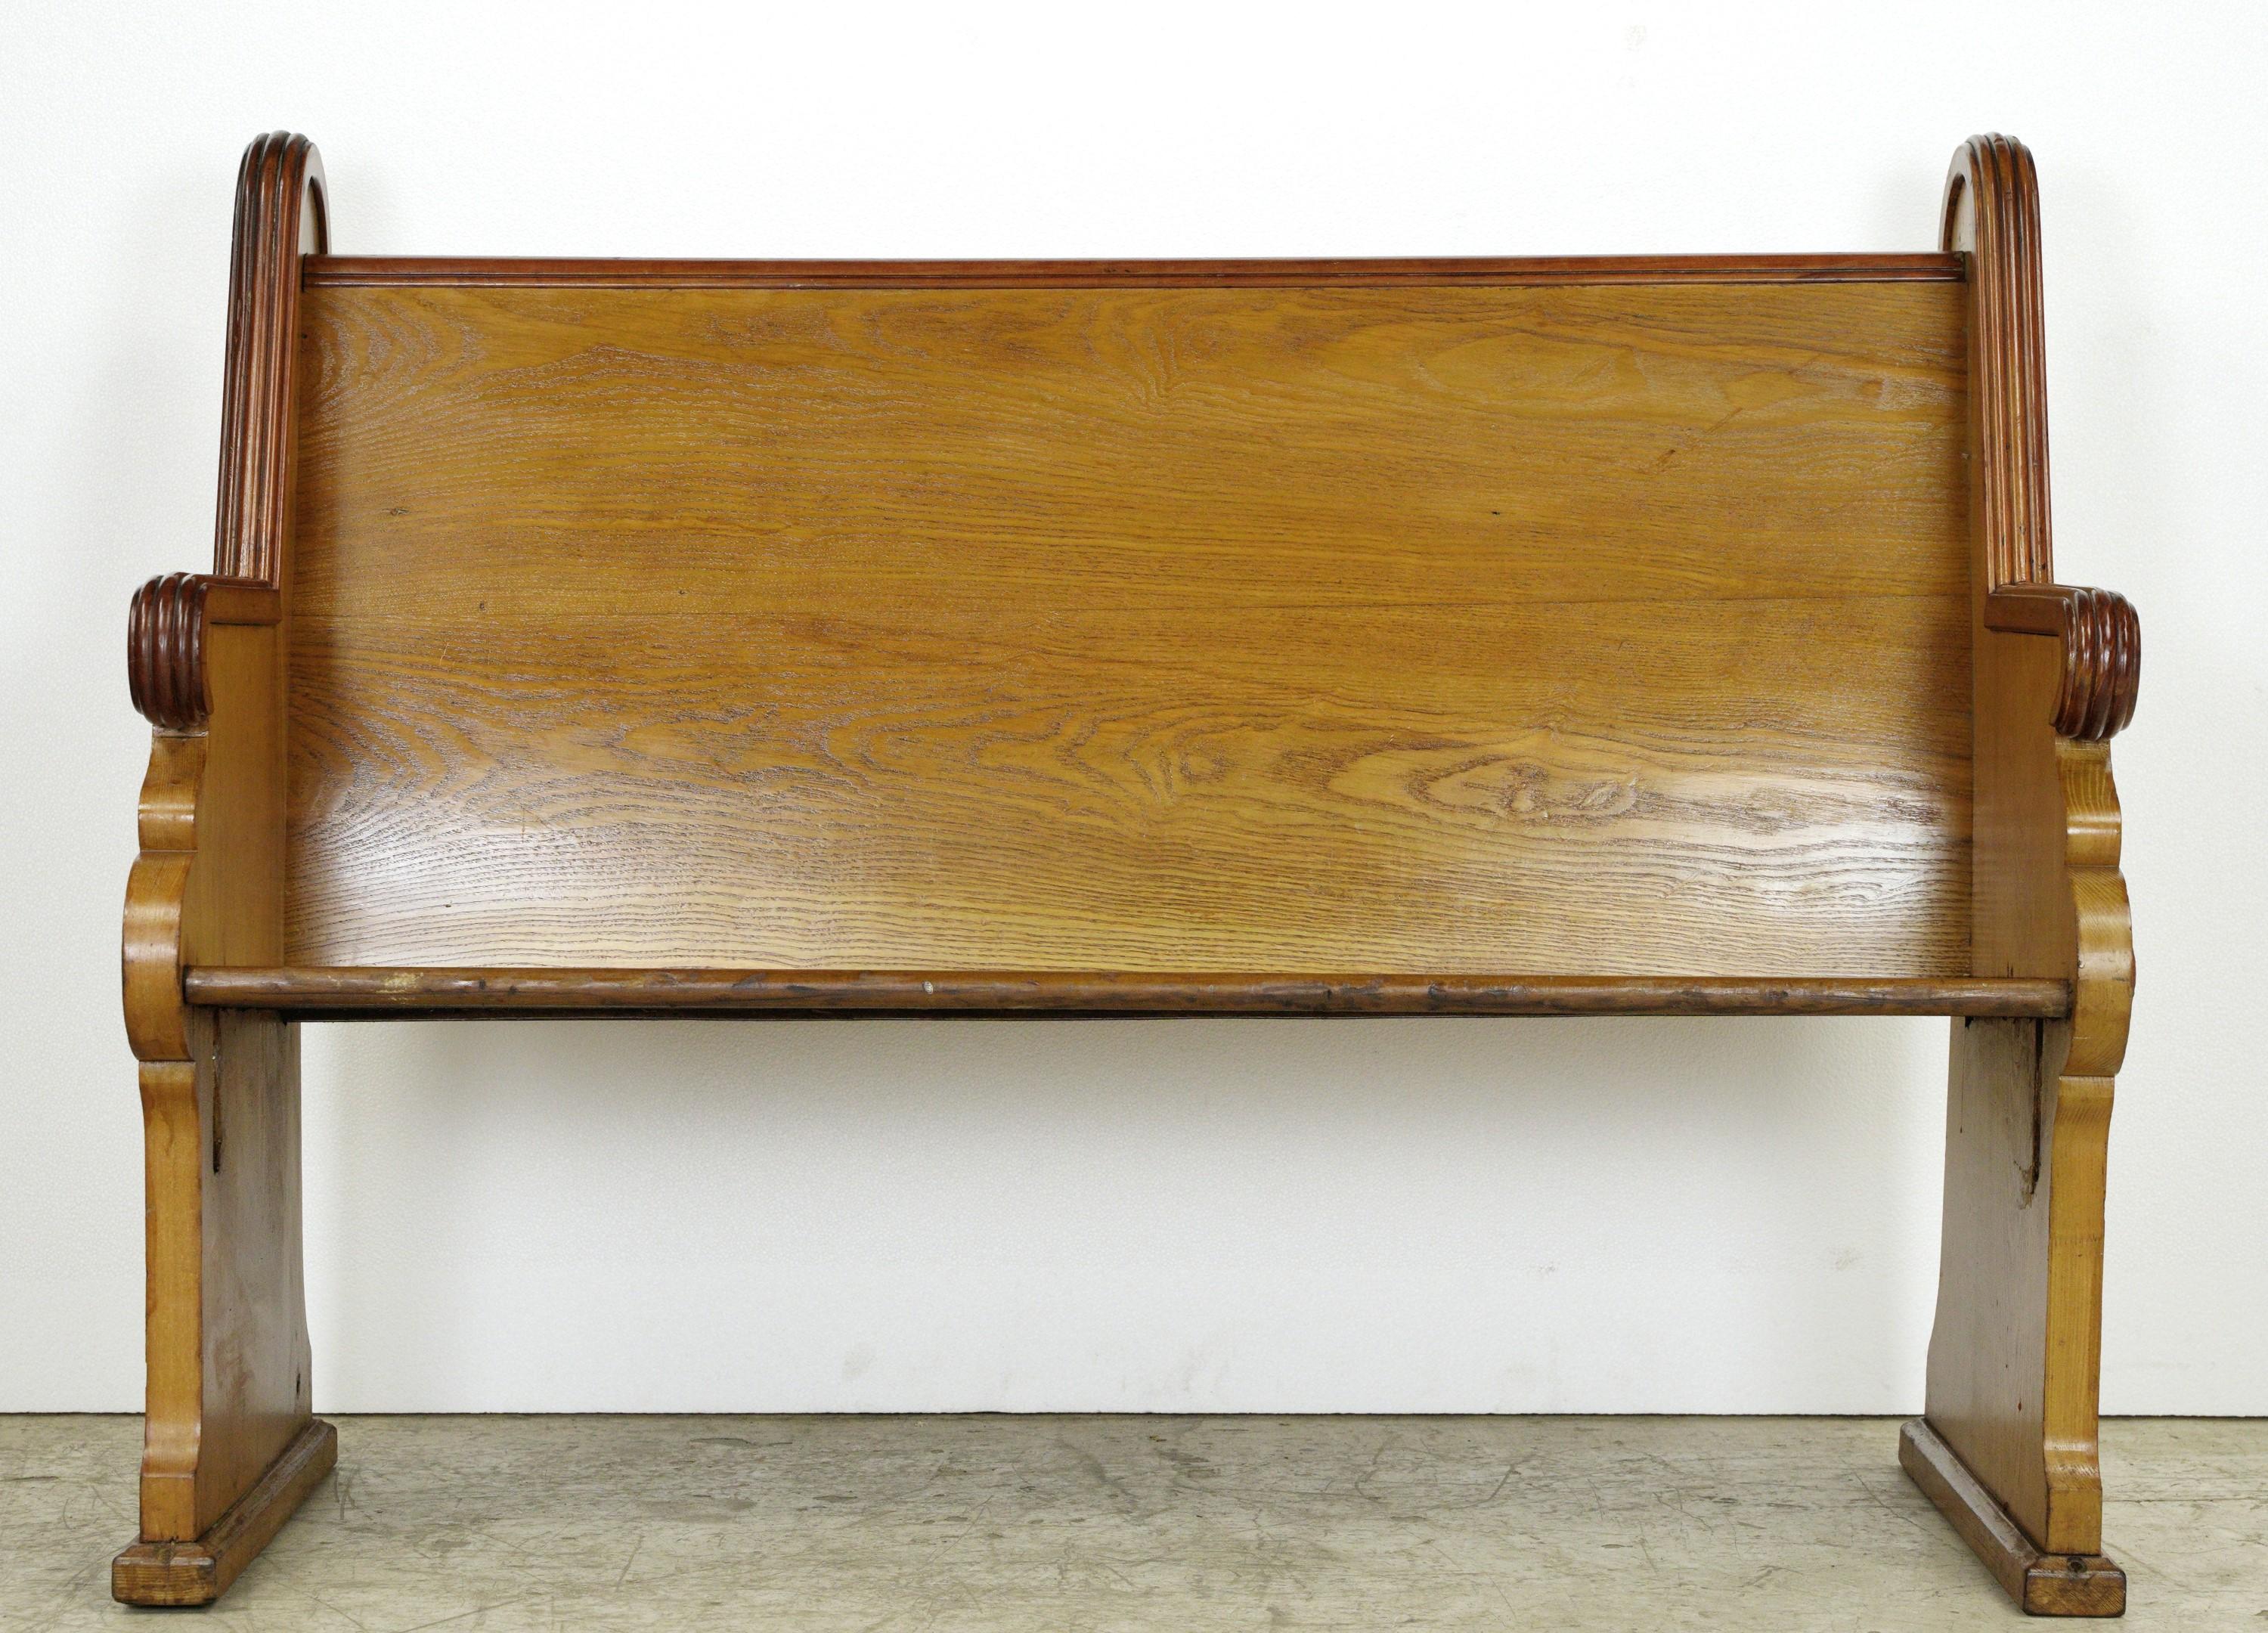 Restored Antique 47 in. Wood Carved Pine Pew Bench In Good Condition For Sale In New York, NY